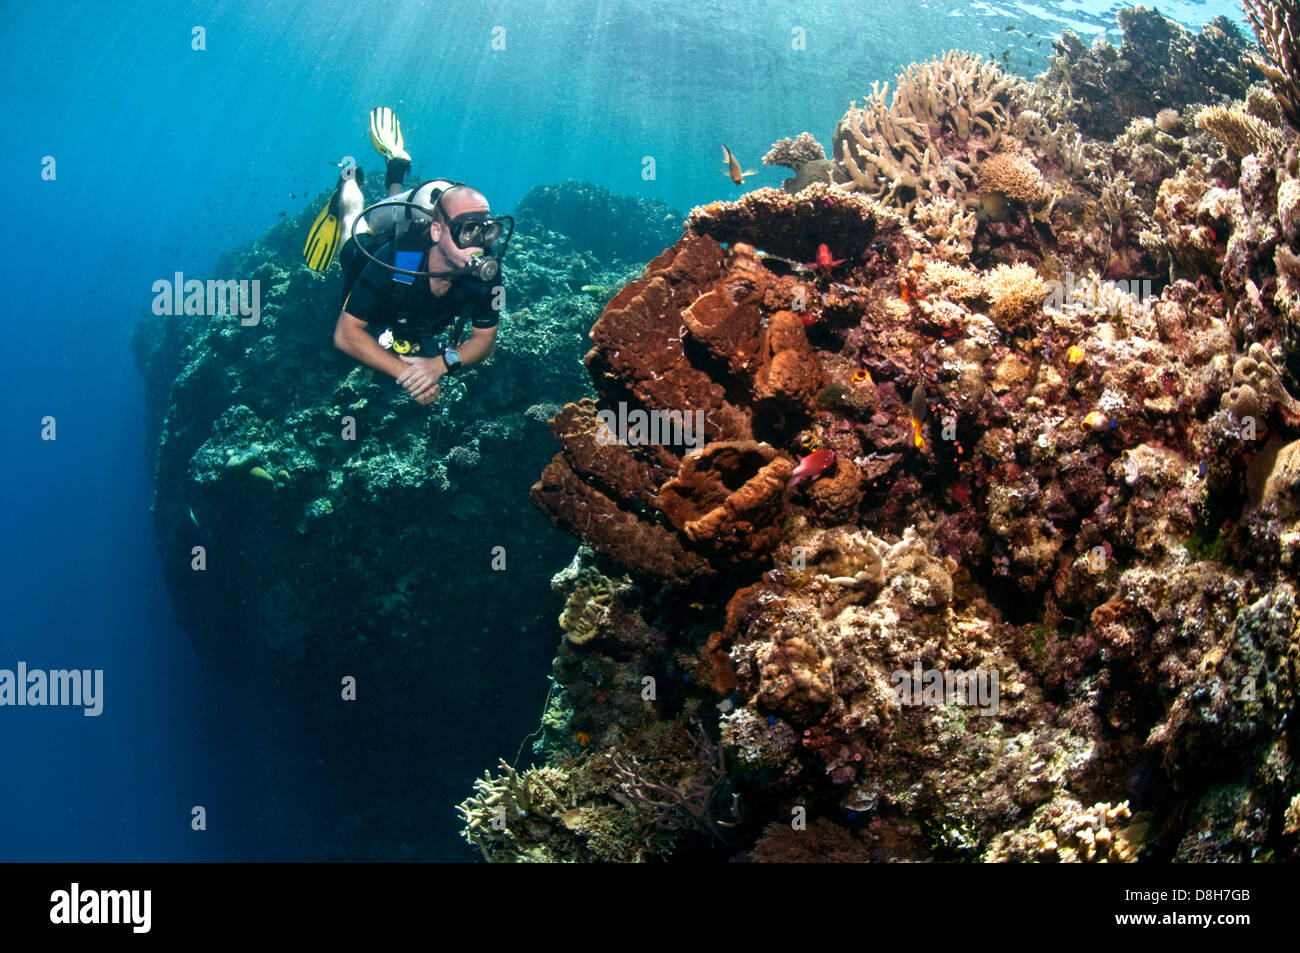 Diving in the coral reef Stock Photo